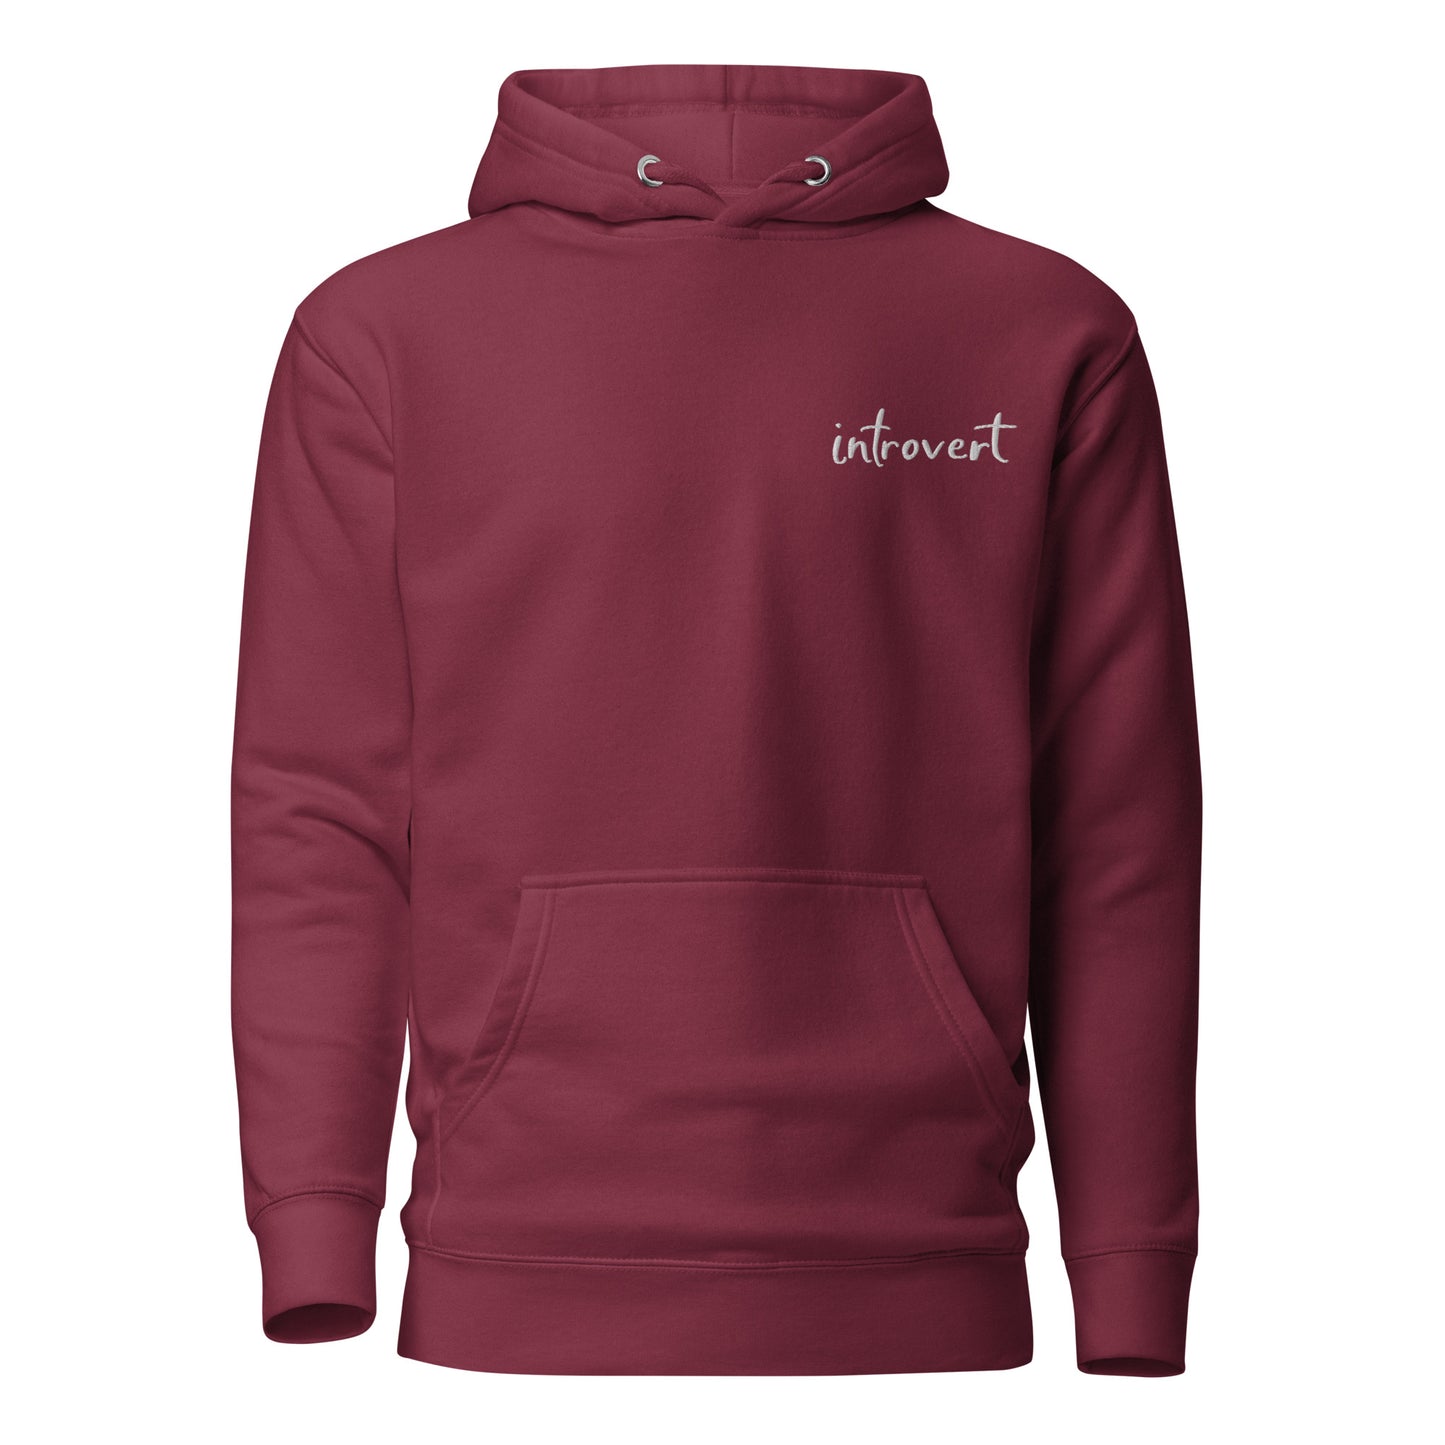 Embroidered Hoodie "introvert"